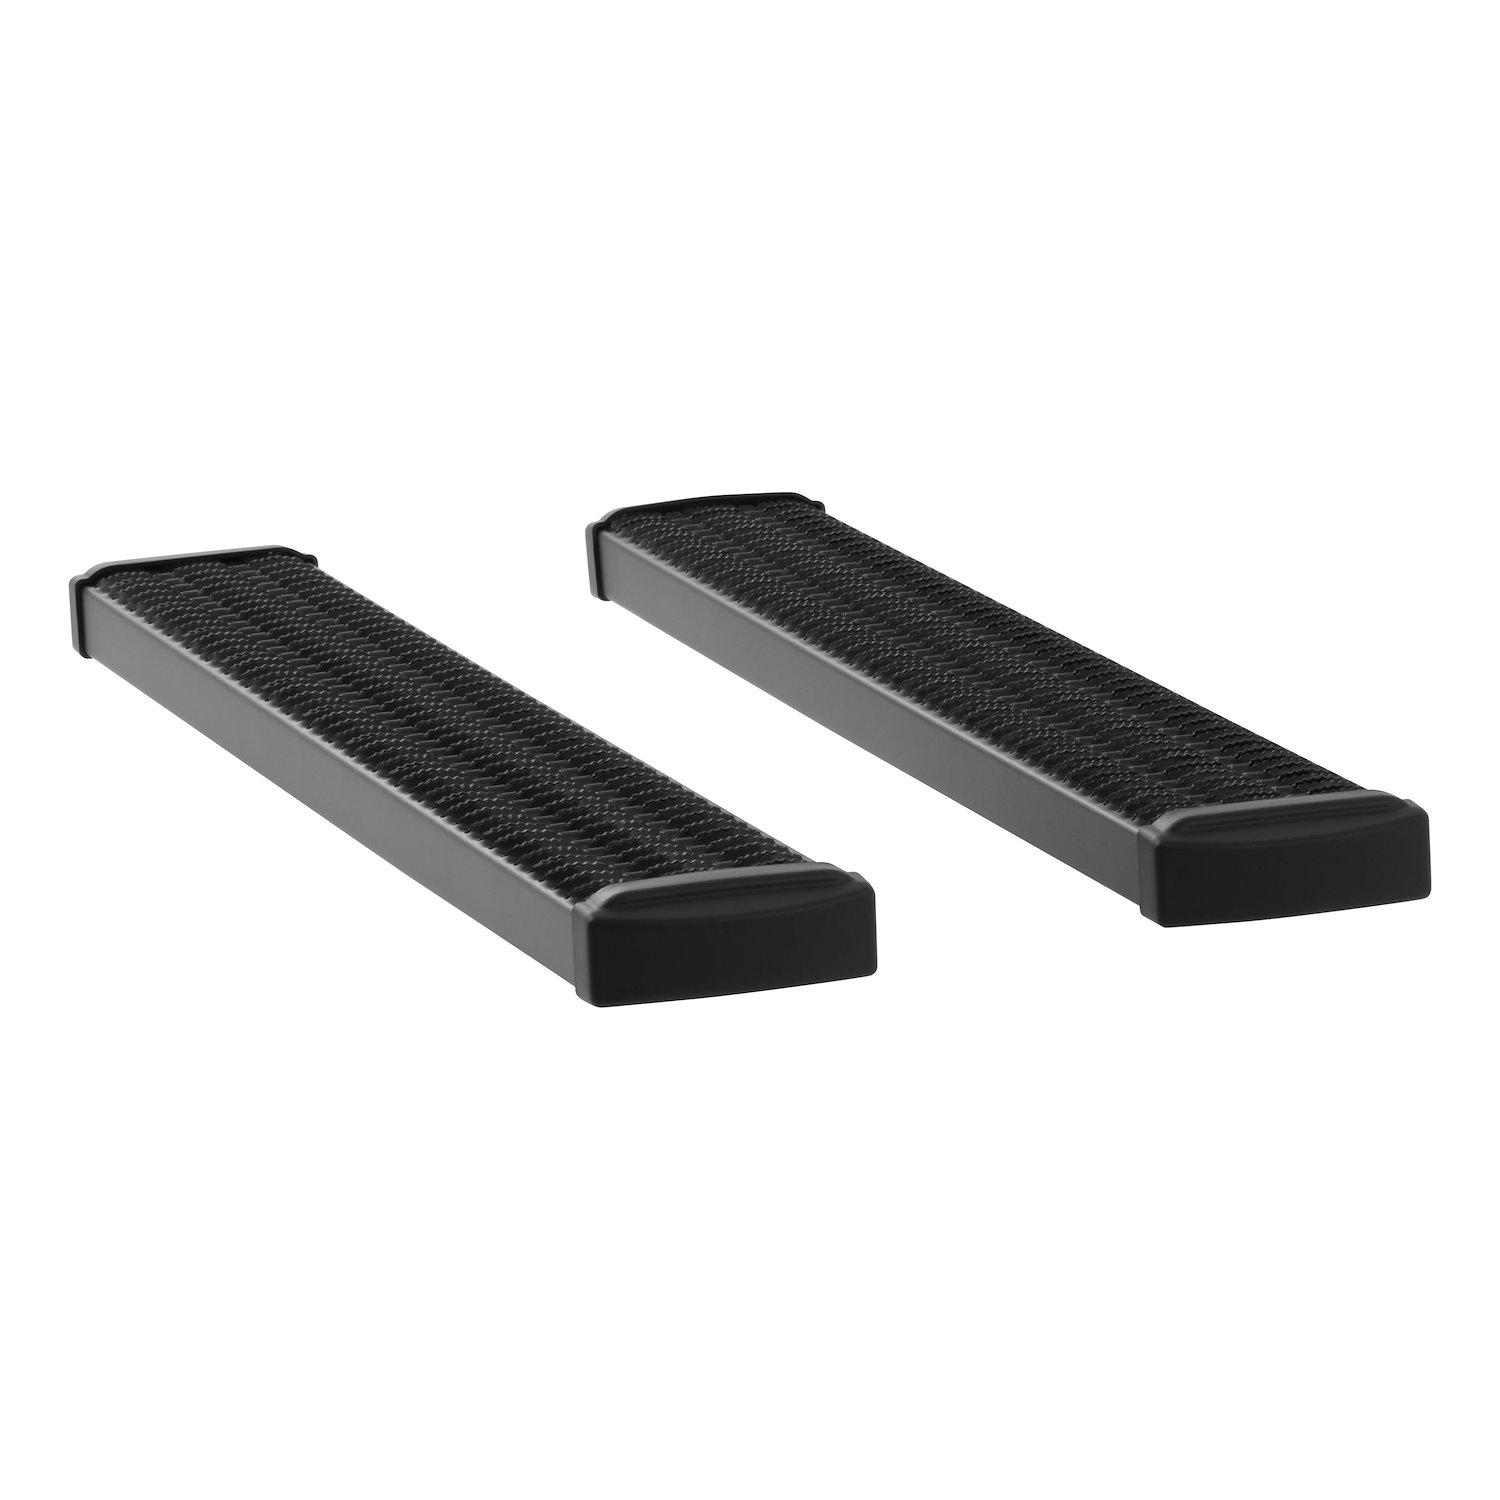 415054-401441 Grip Step 7 in. x 54 in. Black Aluminum Running Boards Fits Select Chevy Silverado, GMC Sierra